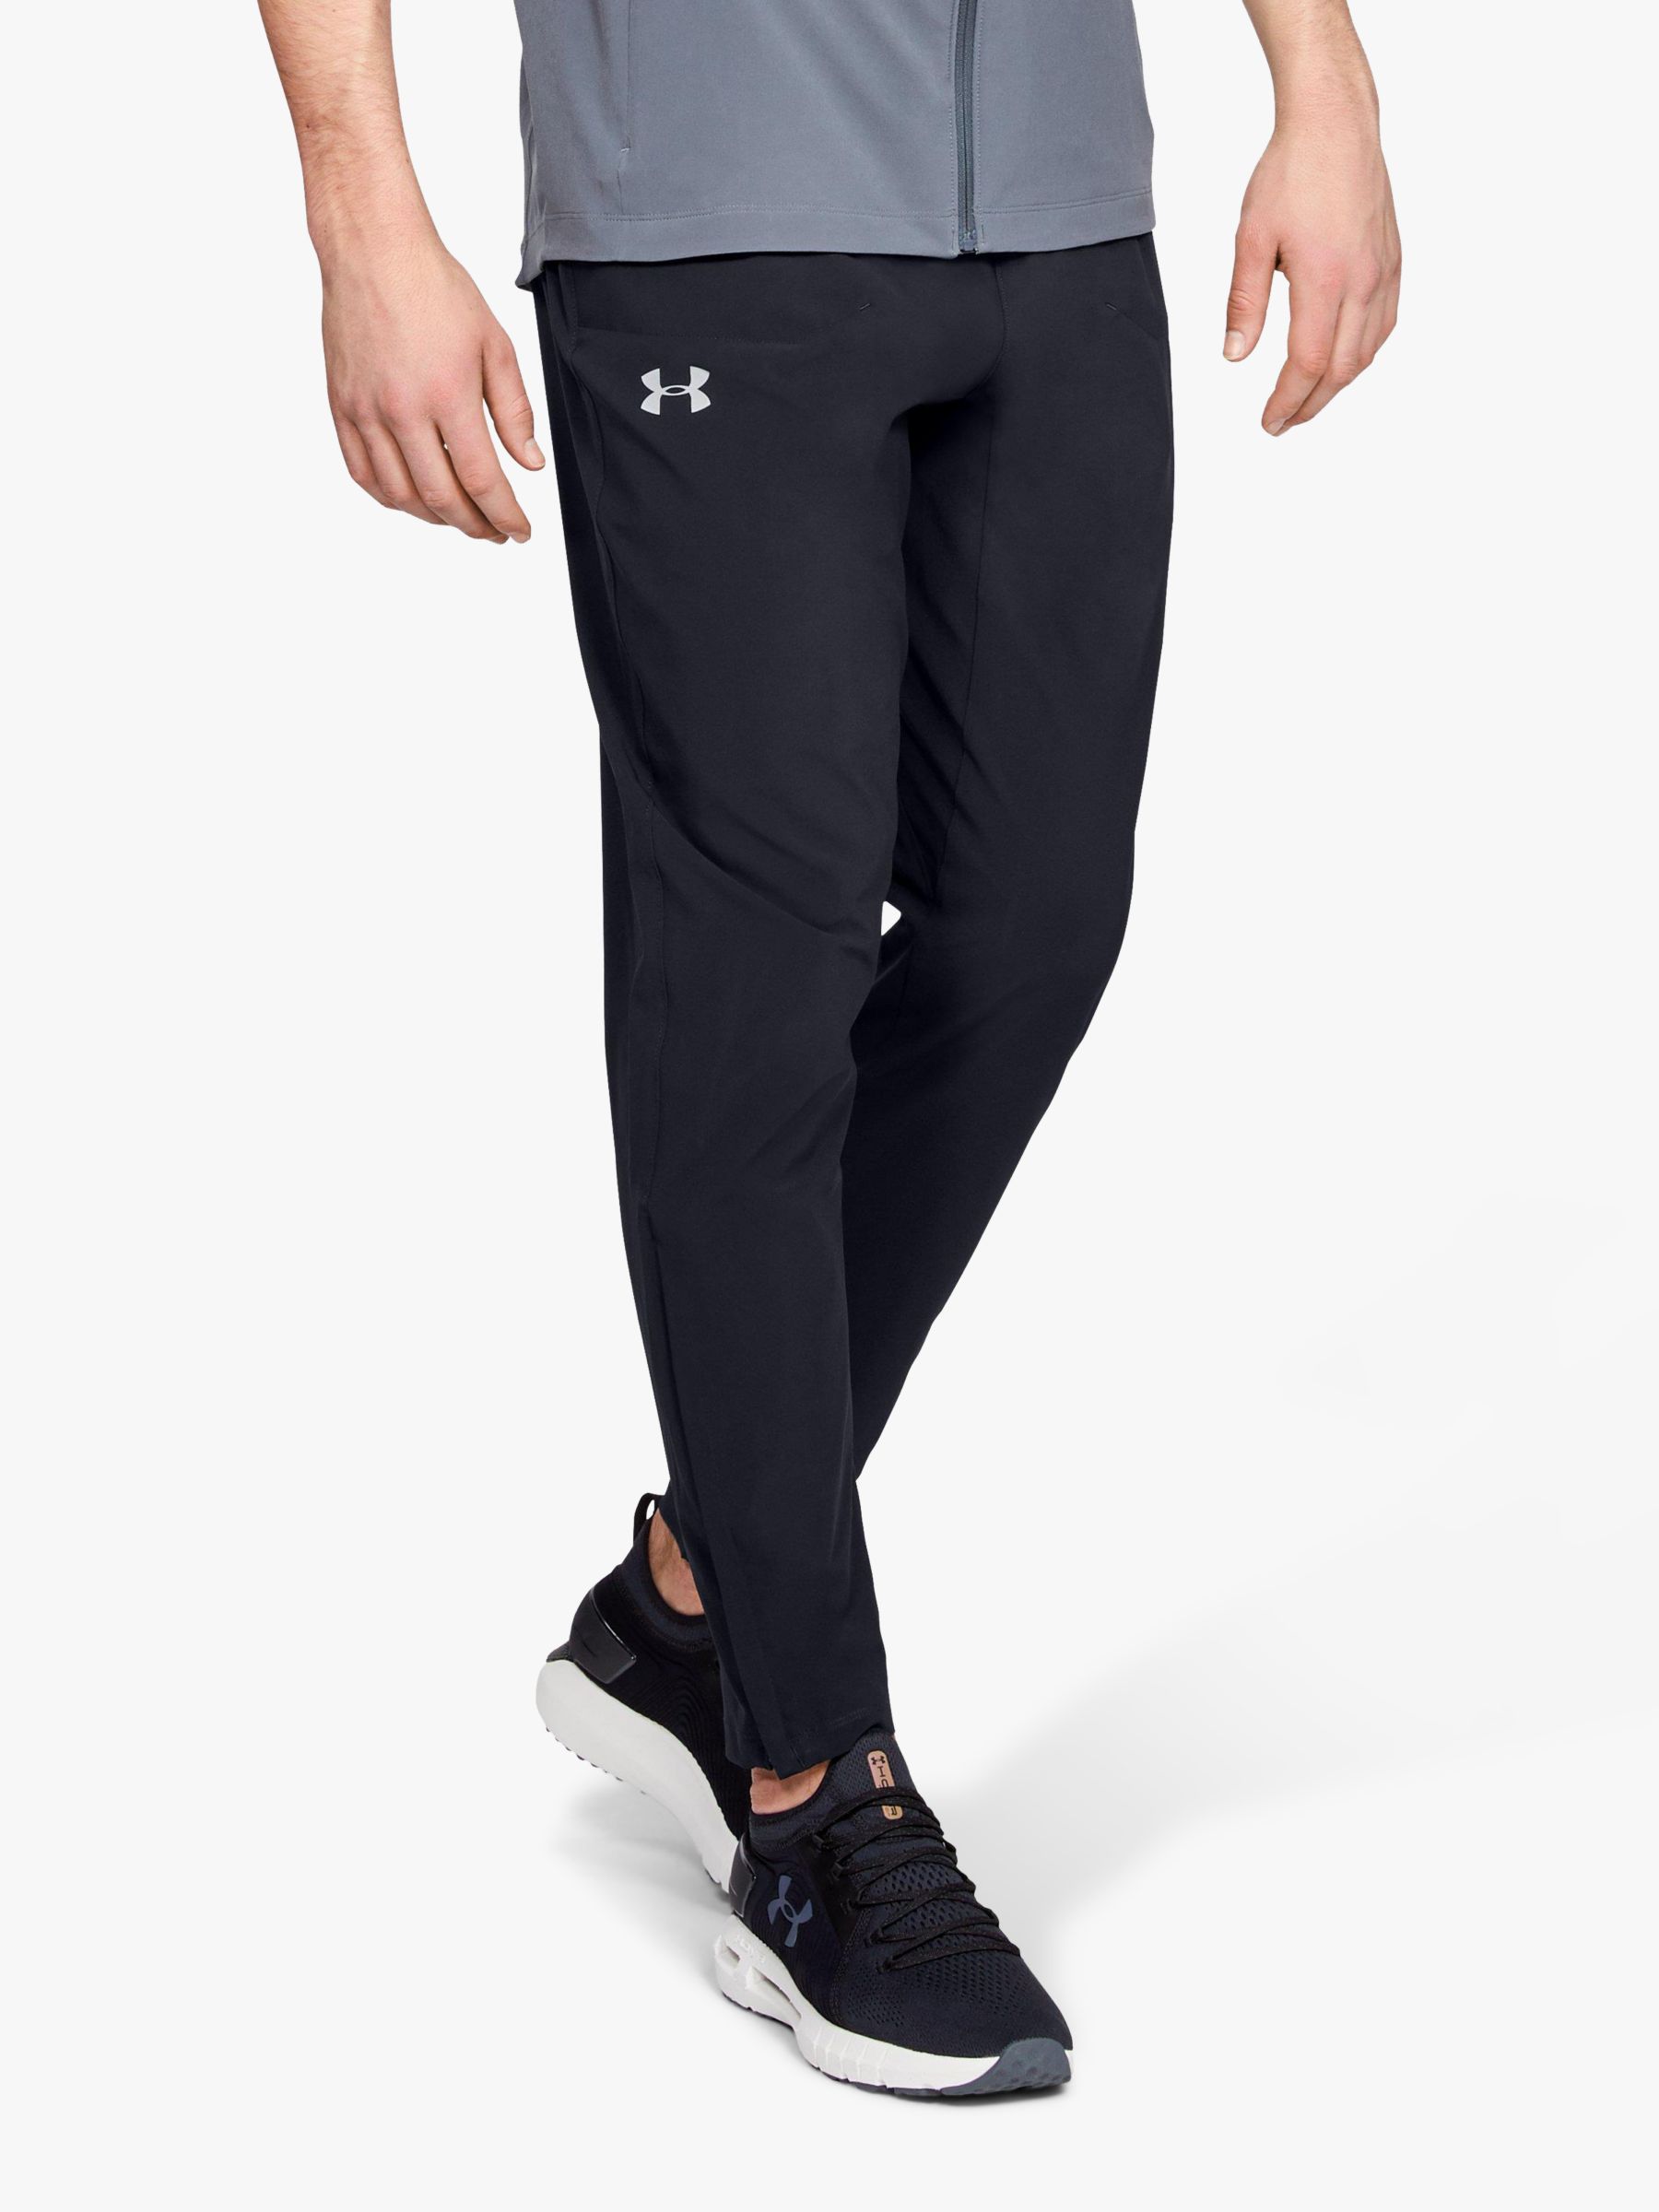 grey under armour tracksuit bottoms